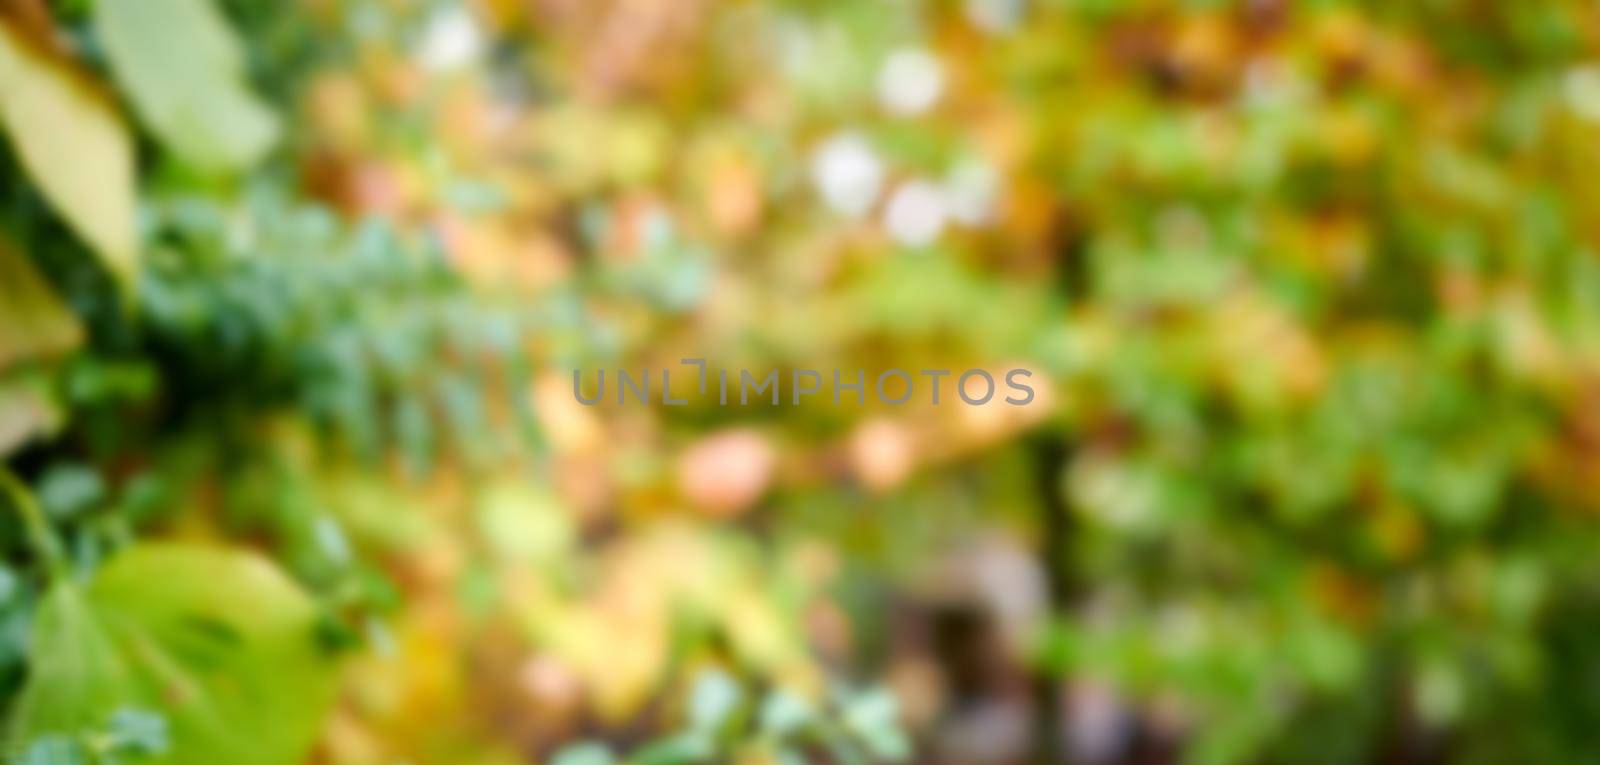 Beautiful, sunny and empty outside garden in the fall with colorful vibrant green and autumn brown leaves. Blurred outdoor nature background with abstract foliage of trees and plants